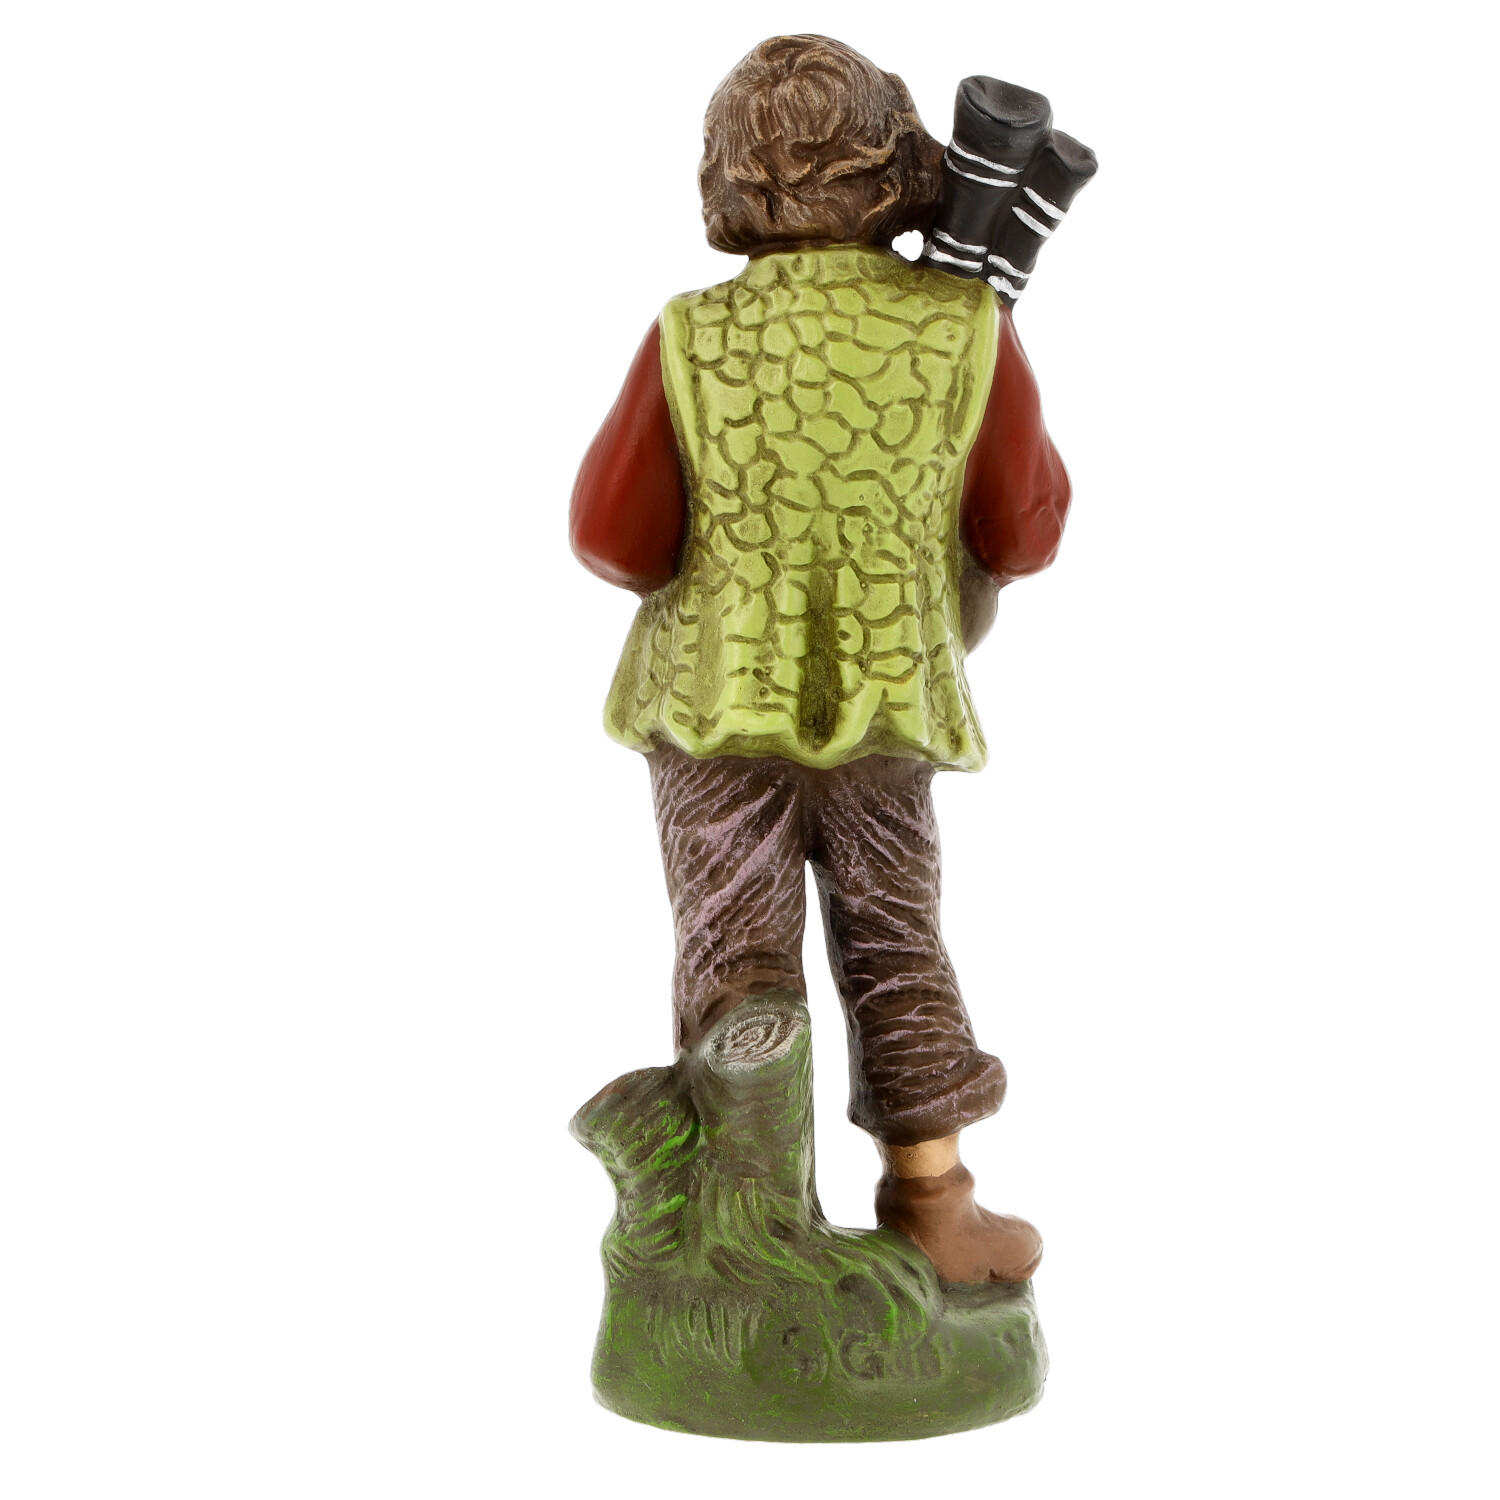 Young shepherd with bagpipe - Marolin Nativity figure - made in Germany